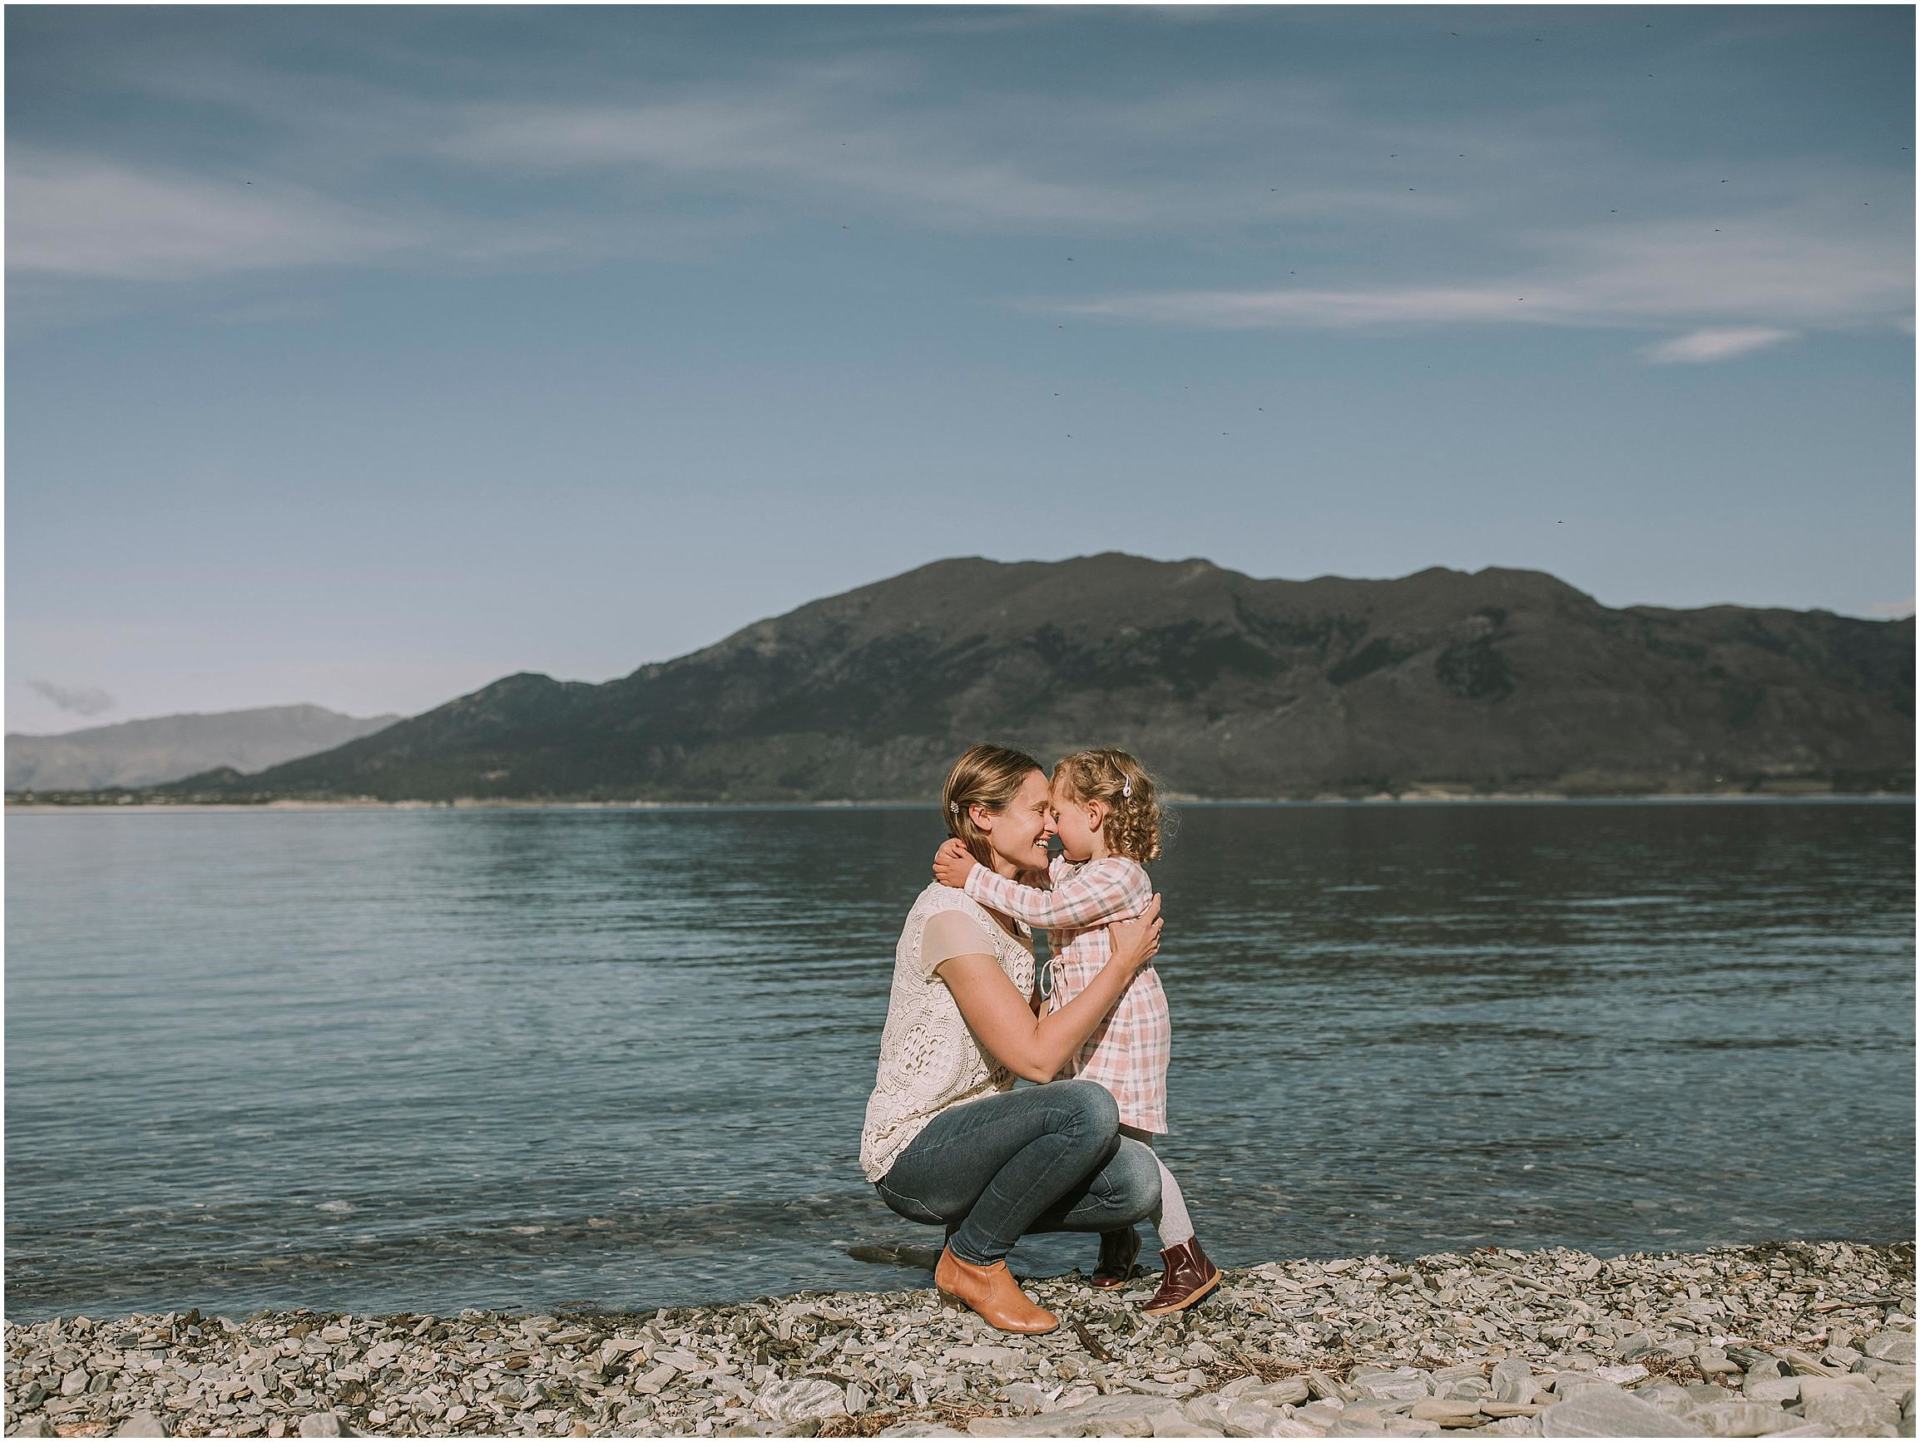 Charlotte Kiri Photography - Family Photography of a mother and daughter cuddling and pressing foreheads, together fondly, in front of a lake with mountains behind in Wanaka, New Zealand.